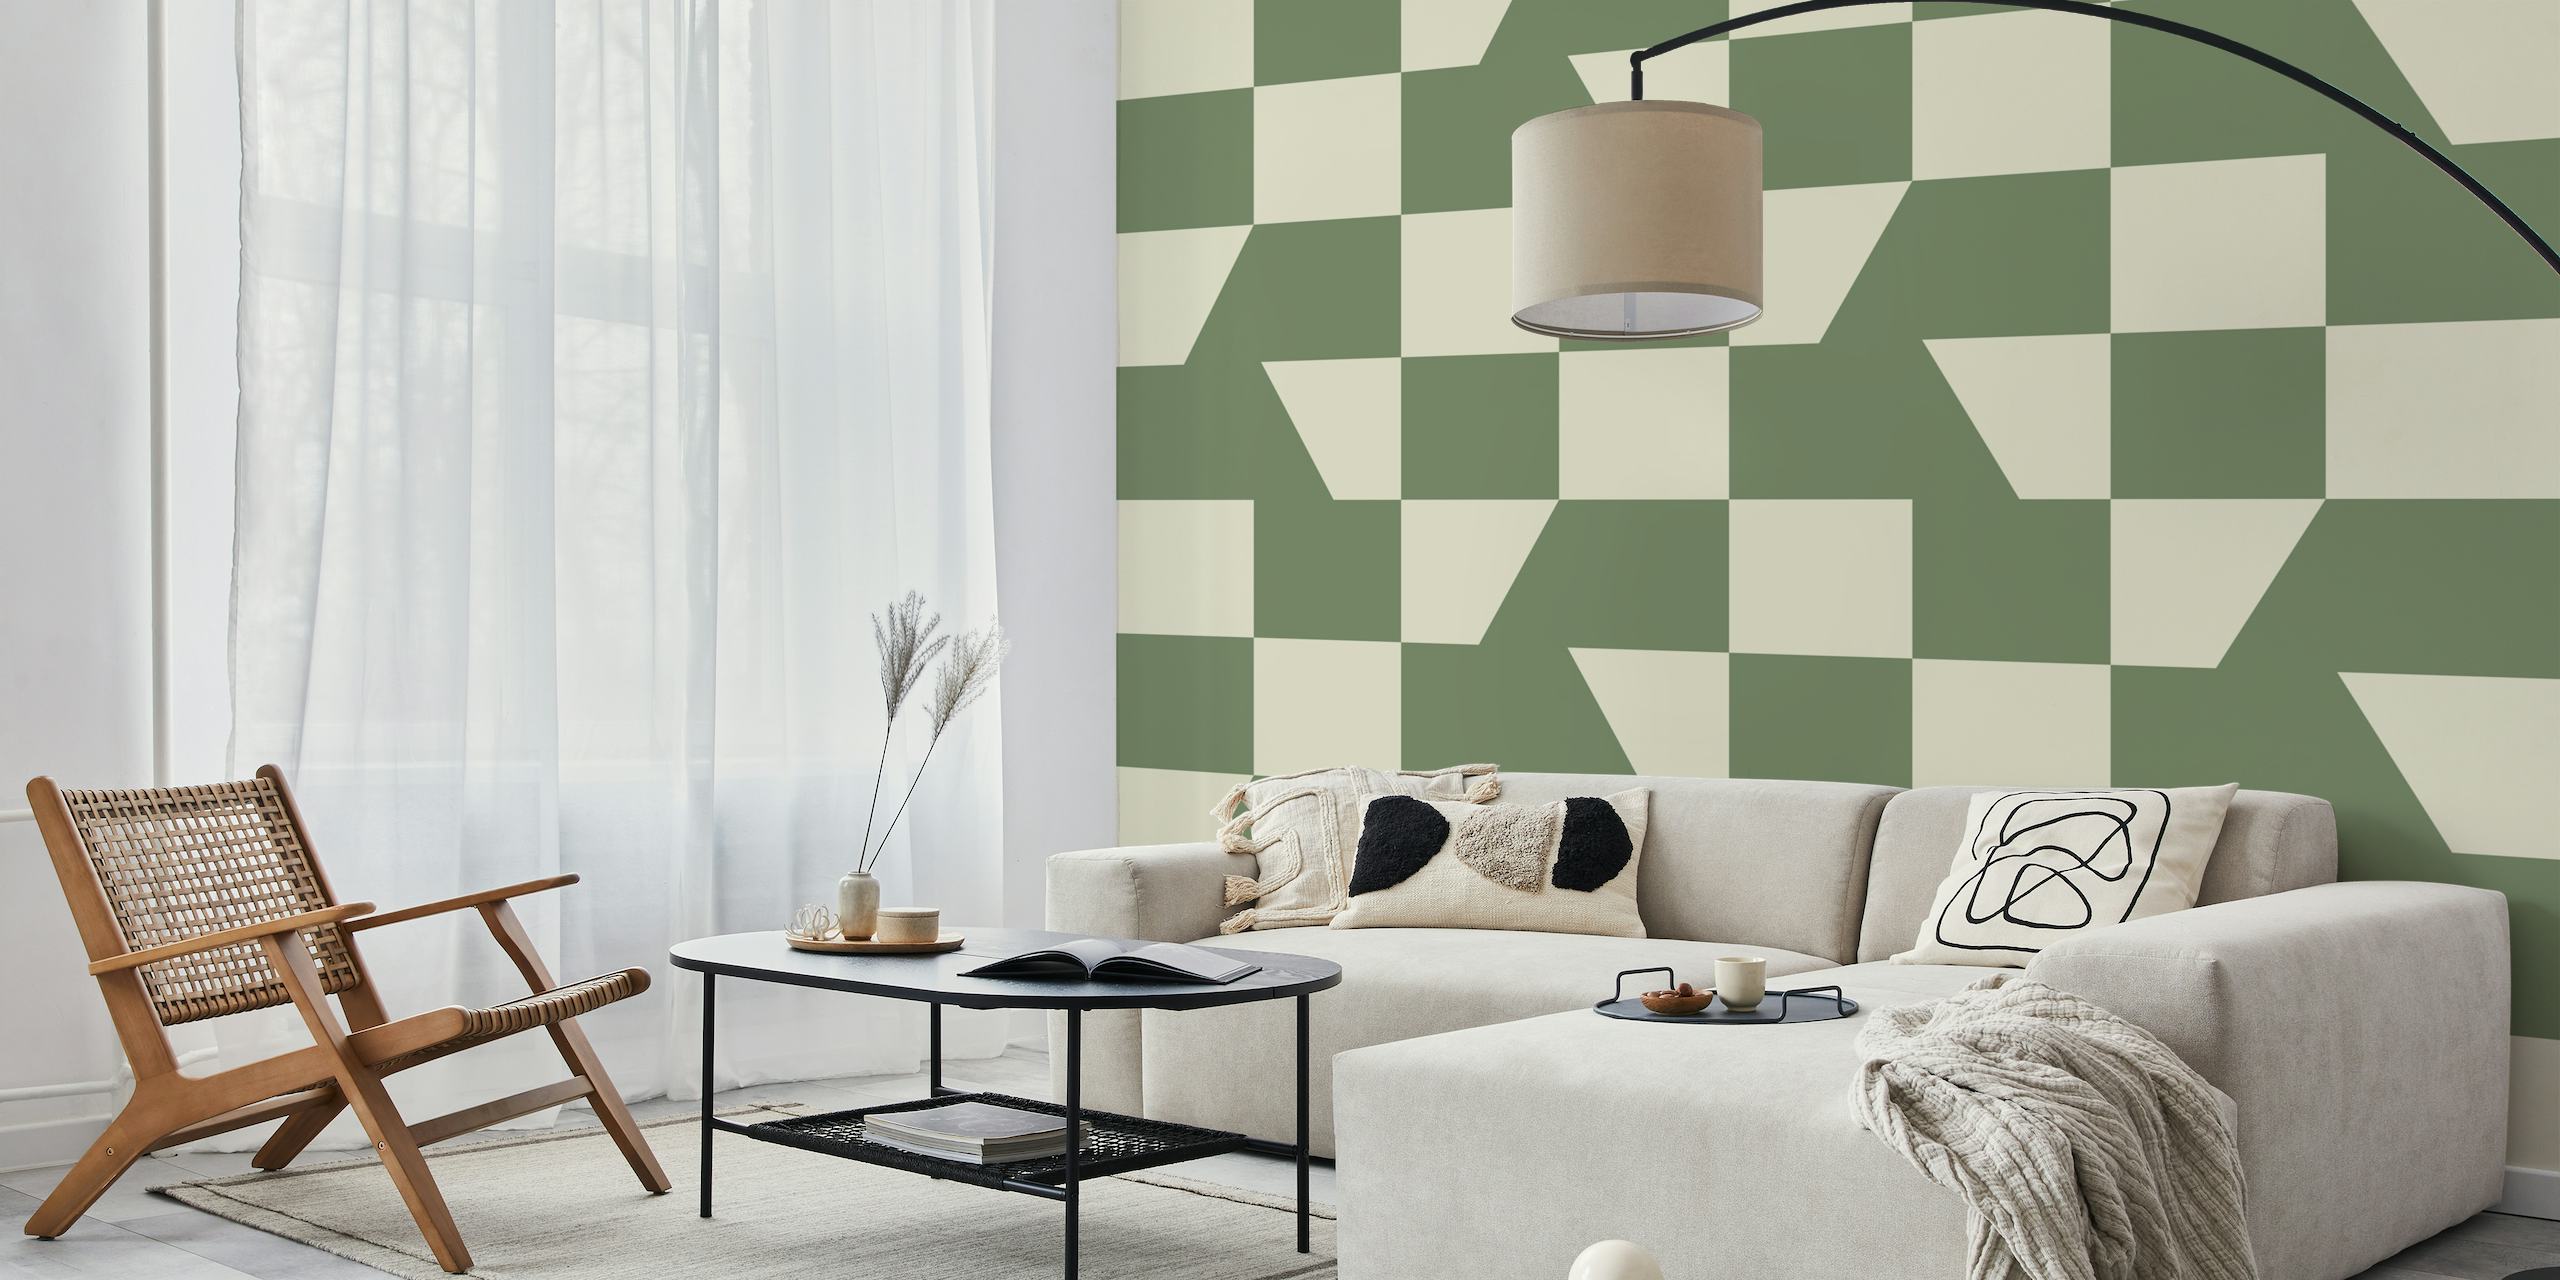 Neutral-toned checkerboard pattern wall mural for modern interiors